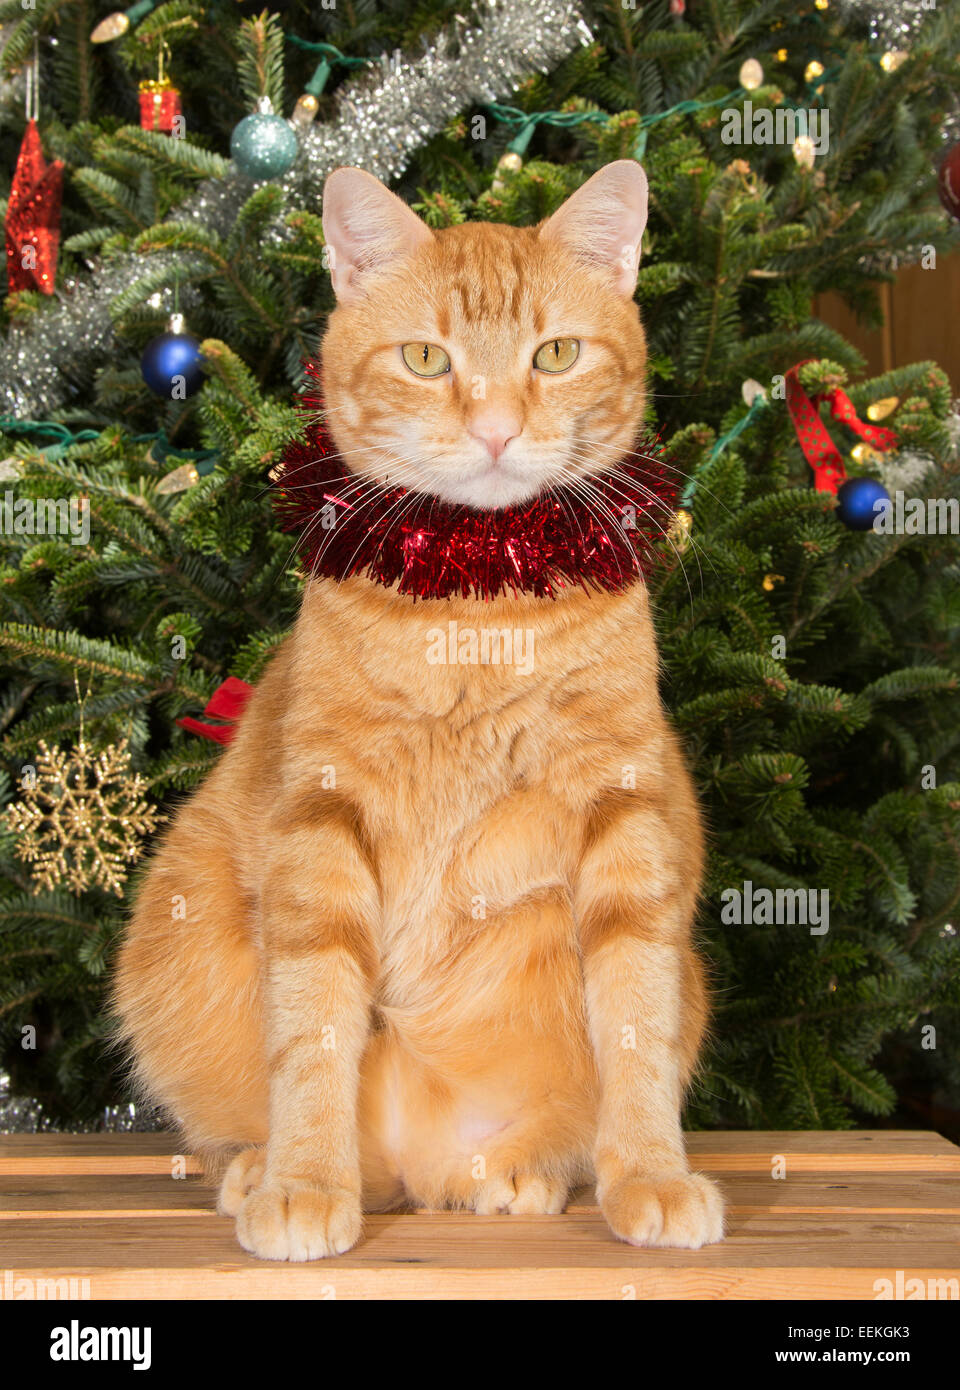 Orange tabby cat sitting in front of a Christmas tree, wearing a strand of red tinsel Stock Photo